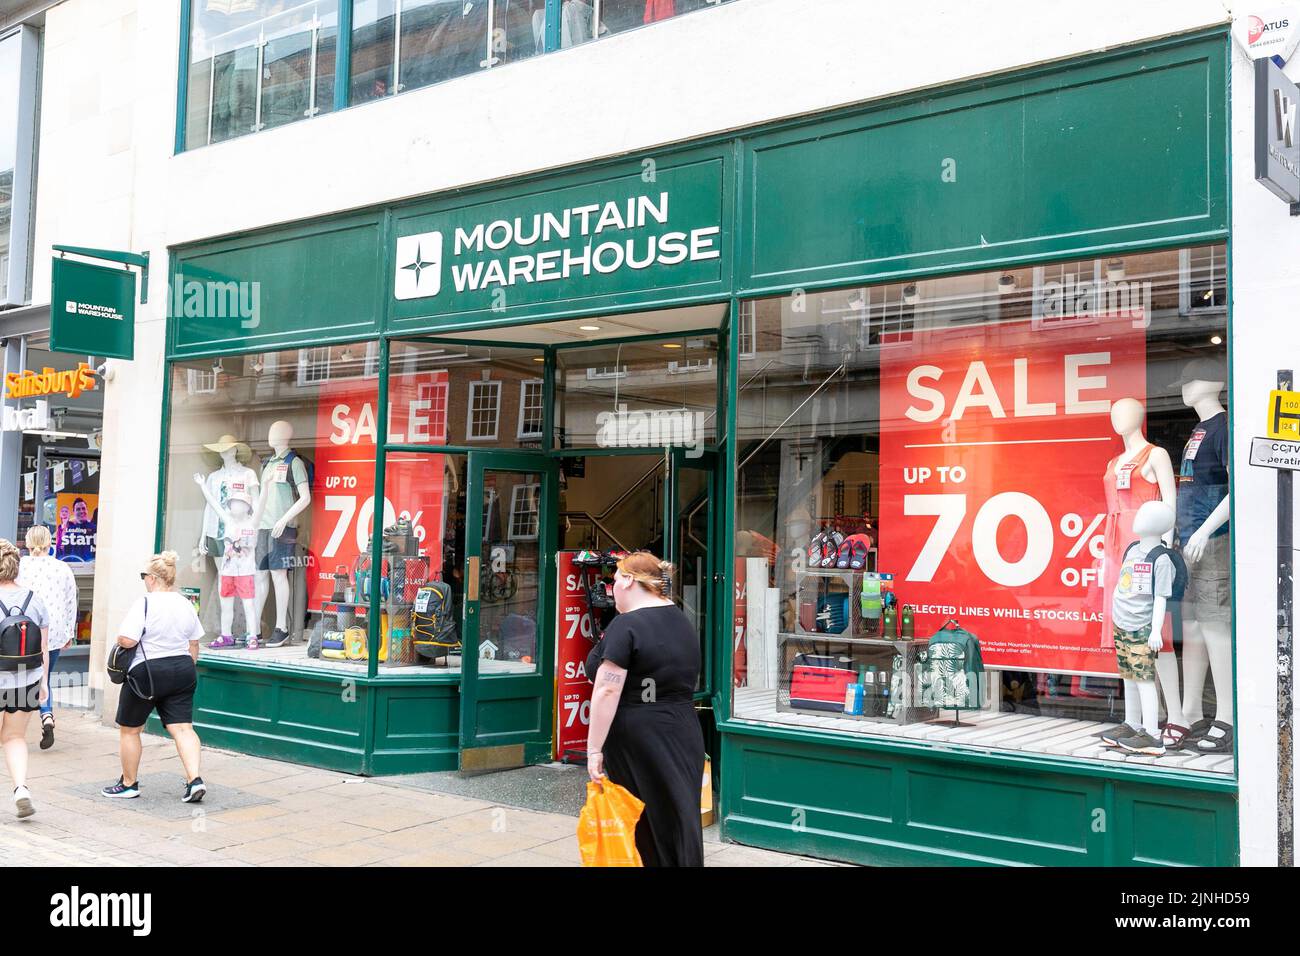 Mountain warehouse outdoor clothing store in York city centre, summer sale offers 70% off some items,Yorkshire,England,UK,july 2022 Stock Photo